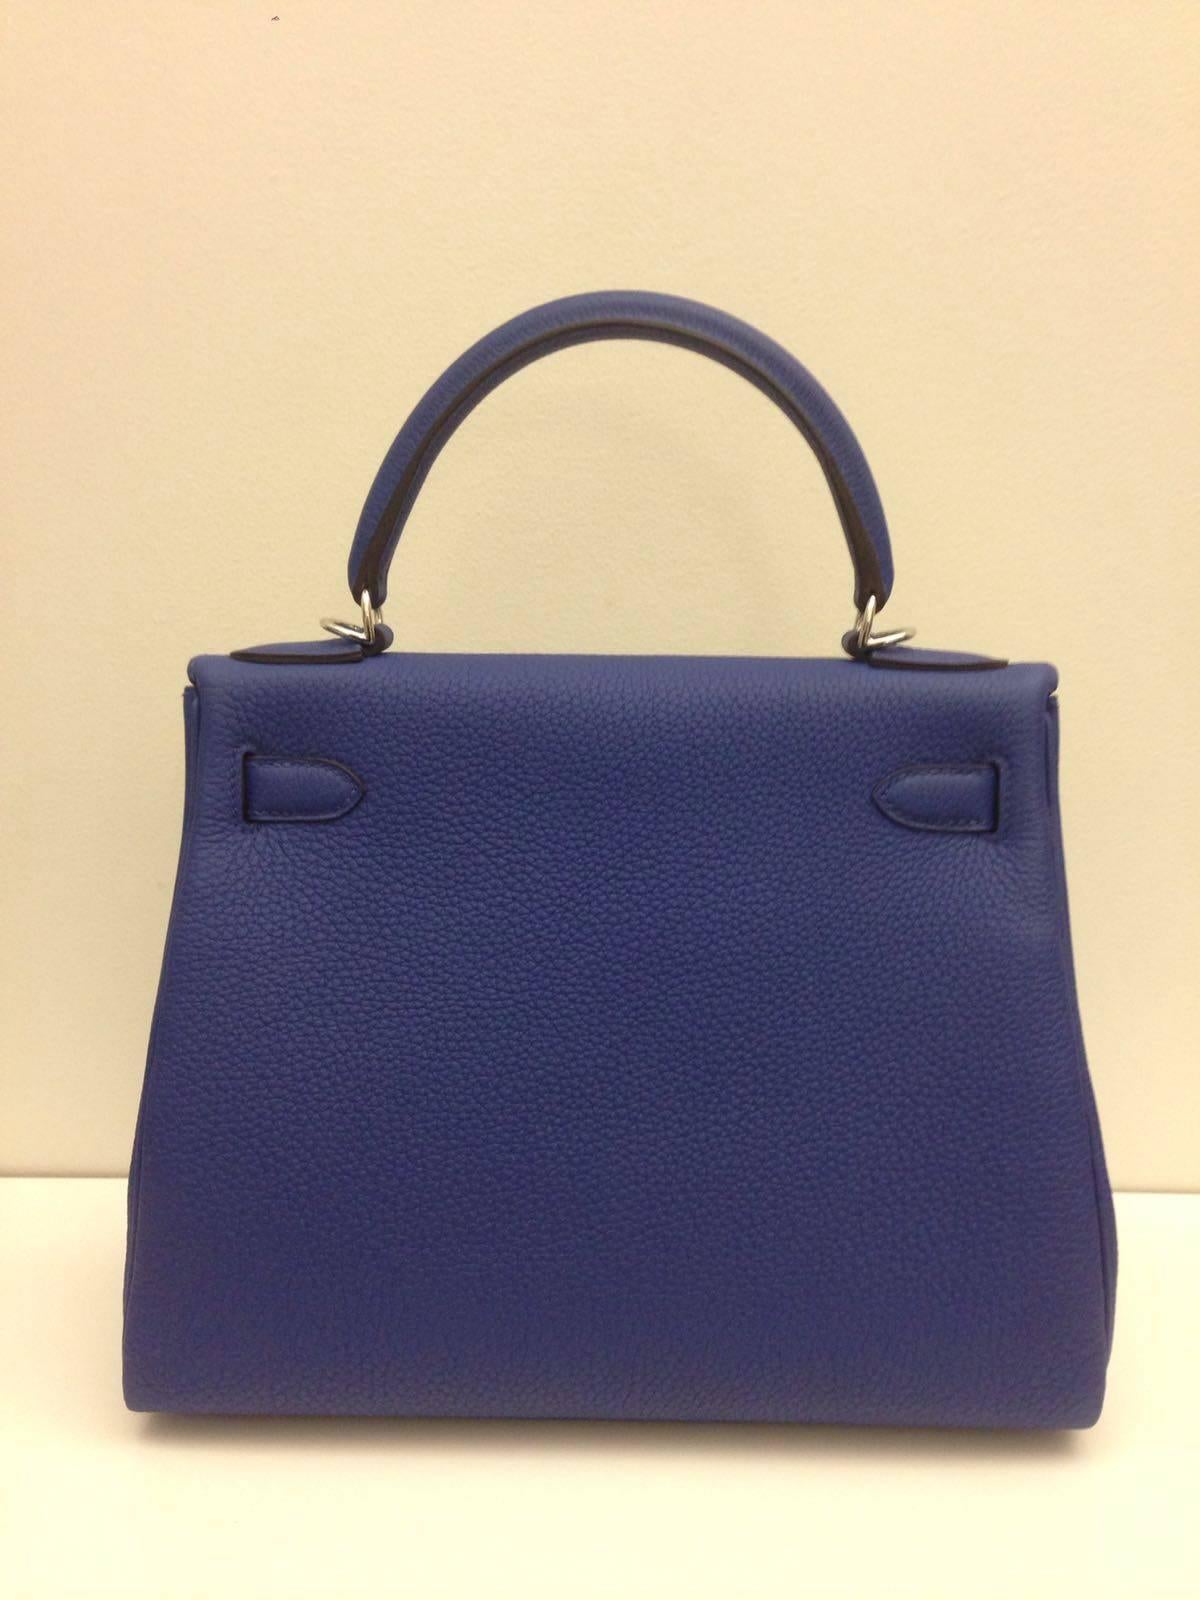 Black Brand New Hermes Kelly 28 Electric Blue Togo PHW For Sale